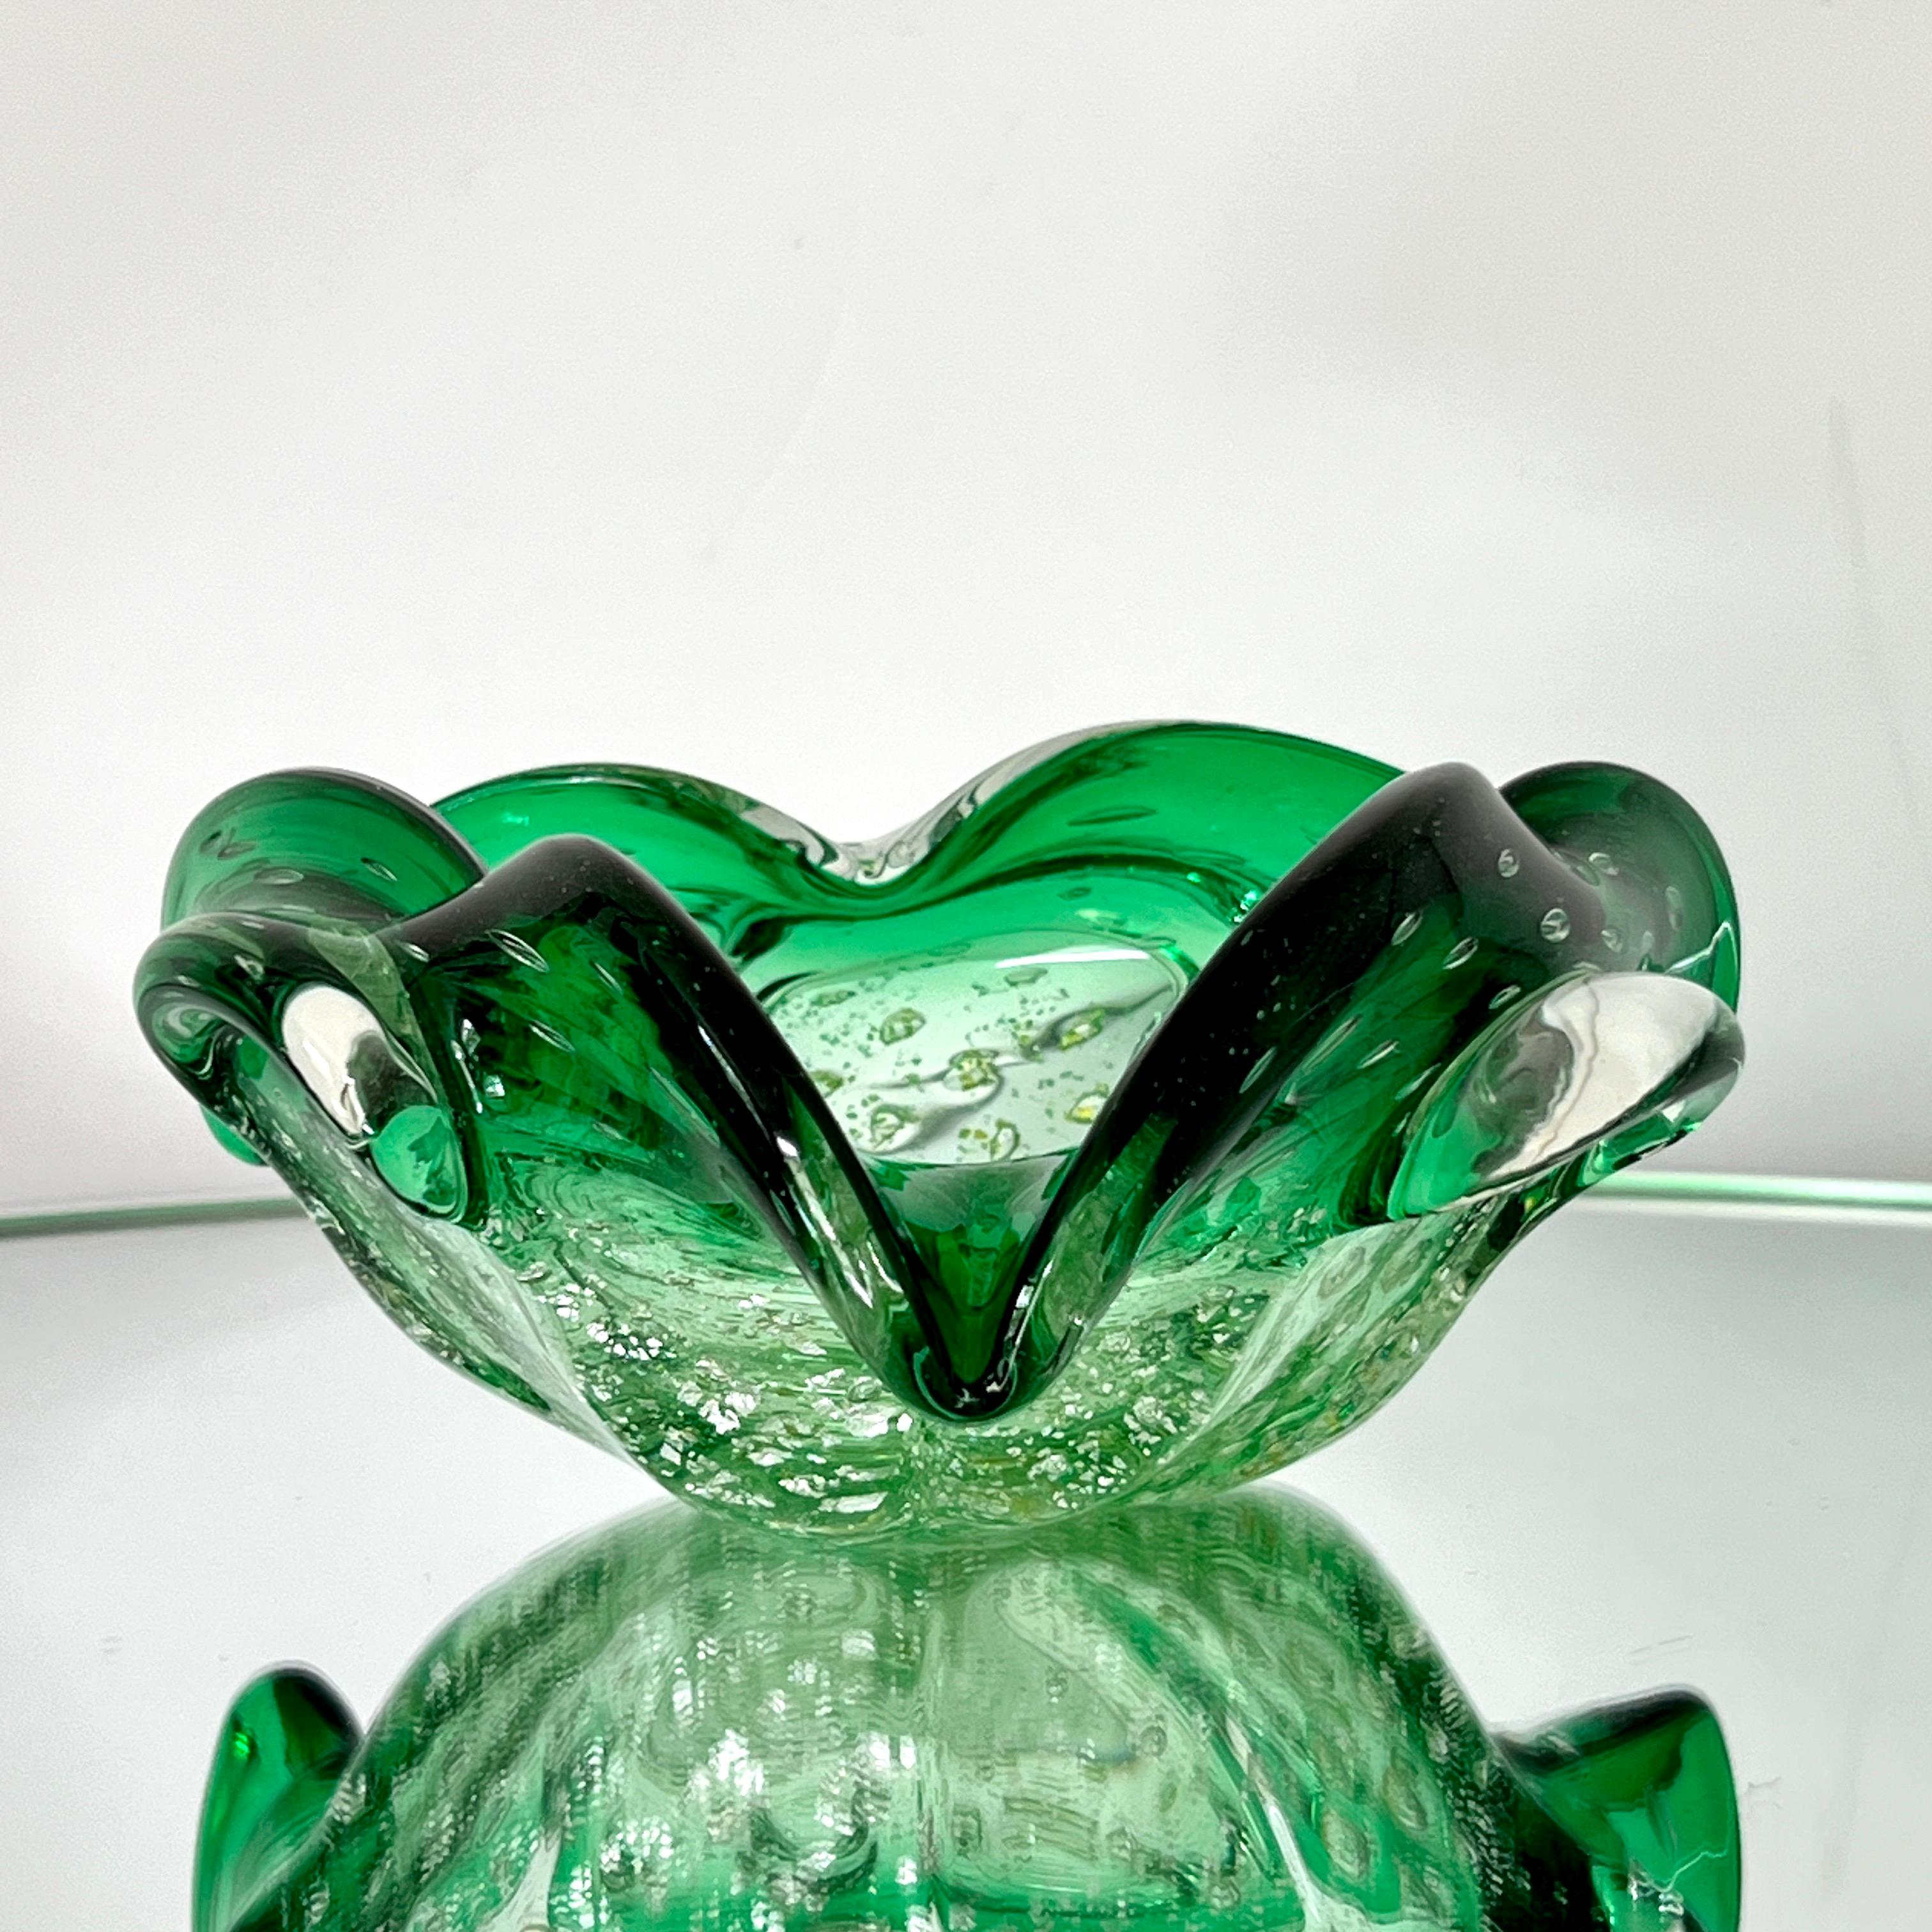 Hand-Crafted Green Murano Vide-Poche Bowl or Ashtray with Gold Leaf Accents, Italy, c. 1950 For Sale